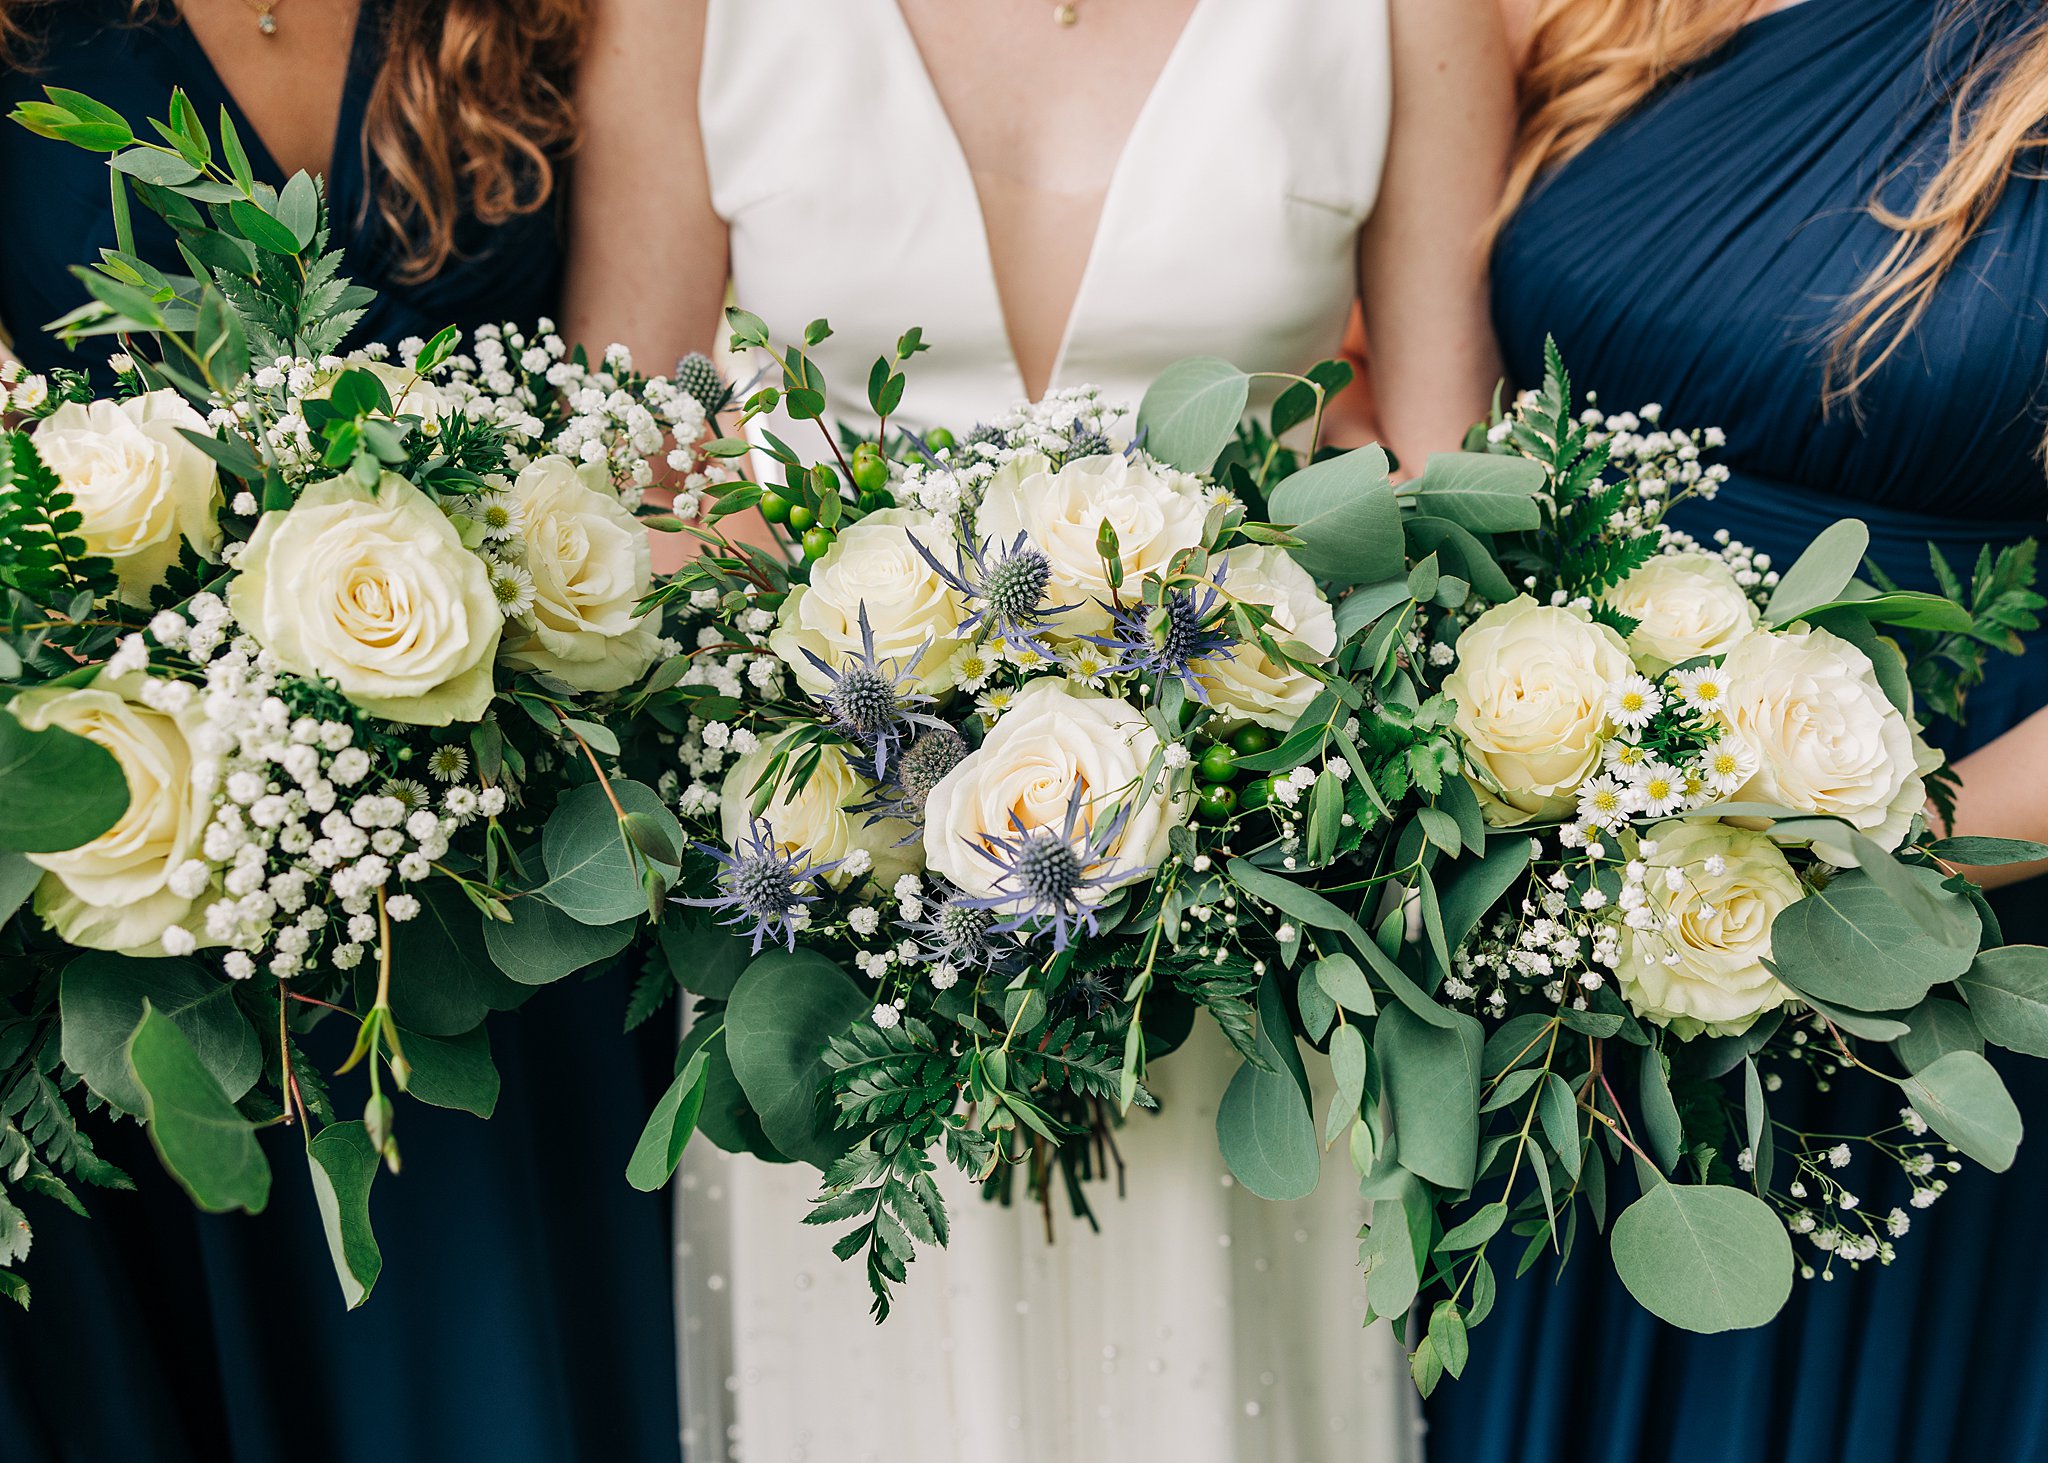 Details of a bride's white and blue bouquet with her bridesmaids